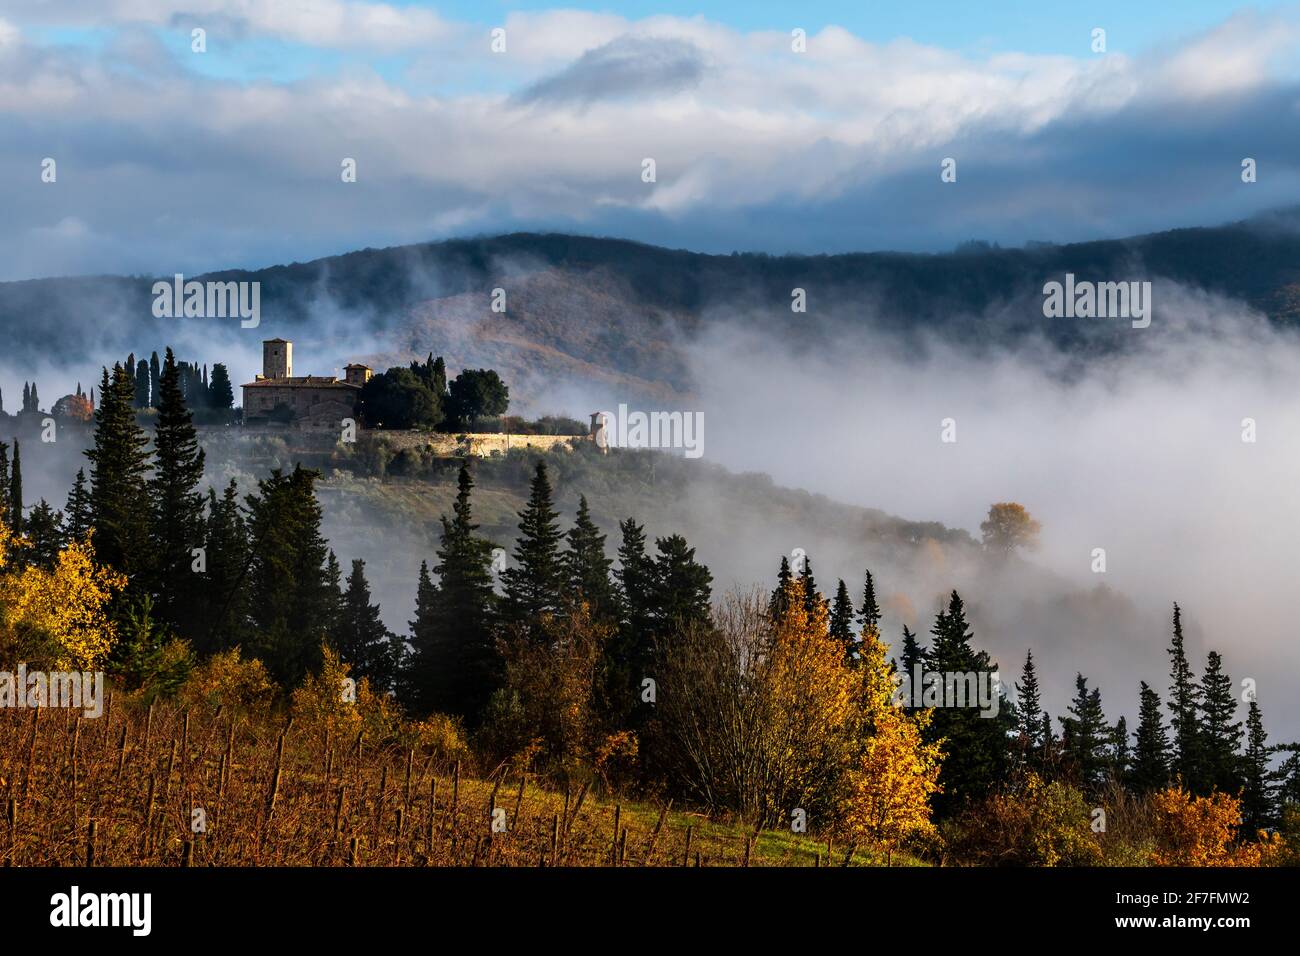 Castello di Colognole as sun breaks through early morning mist, Greve in Chianti, Tuscany, Italy, Europe Stock Photo